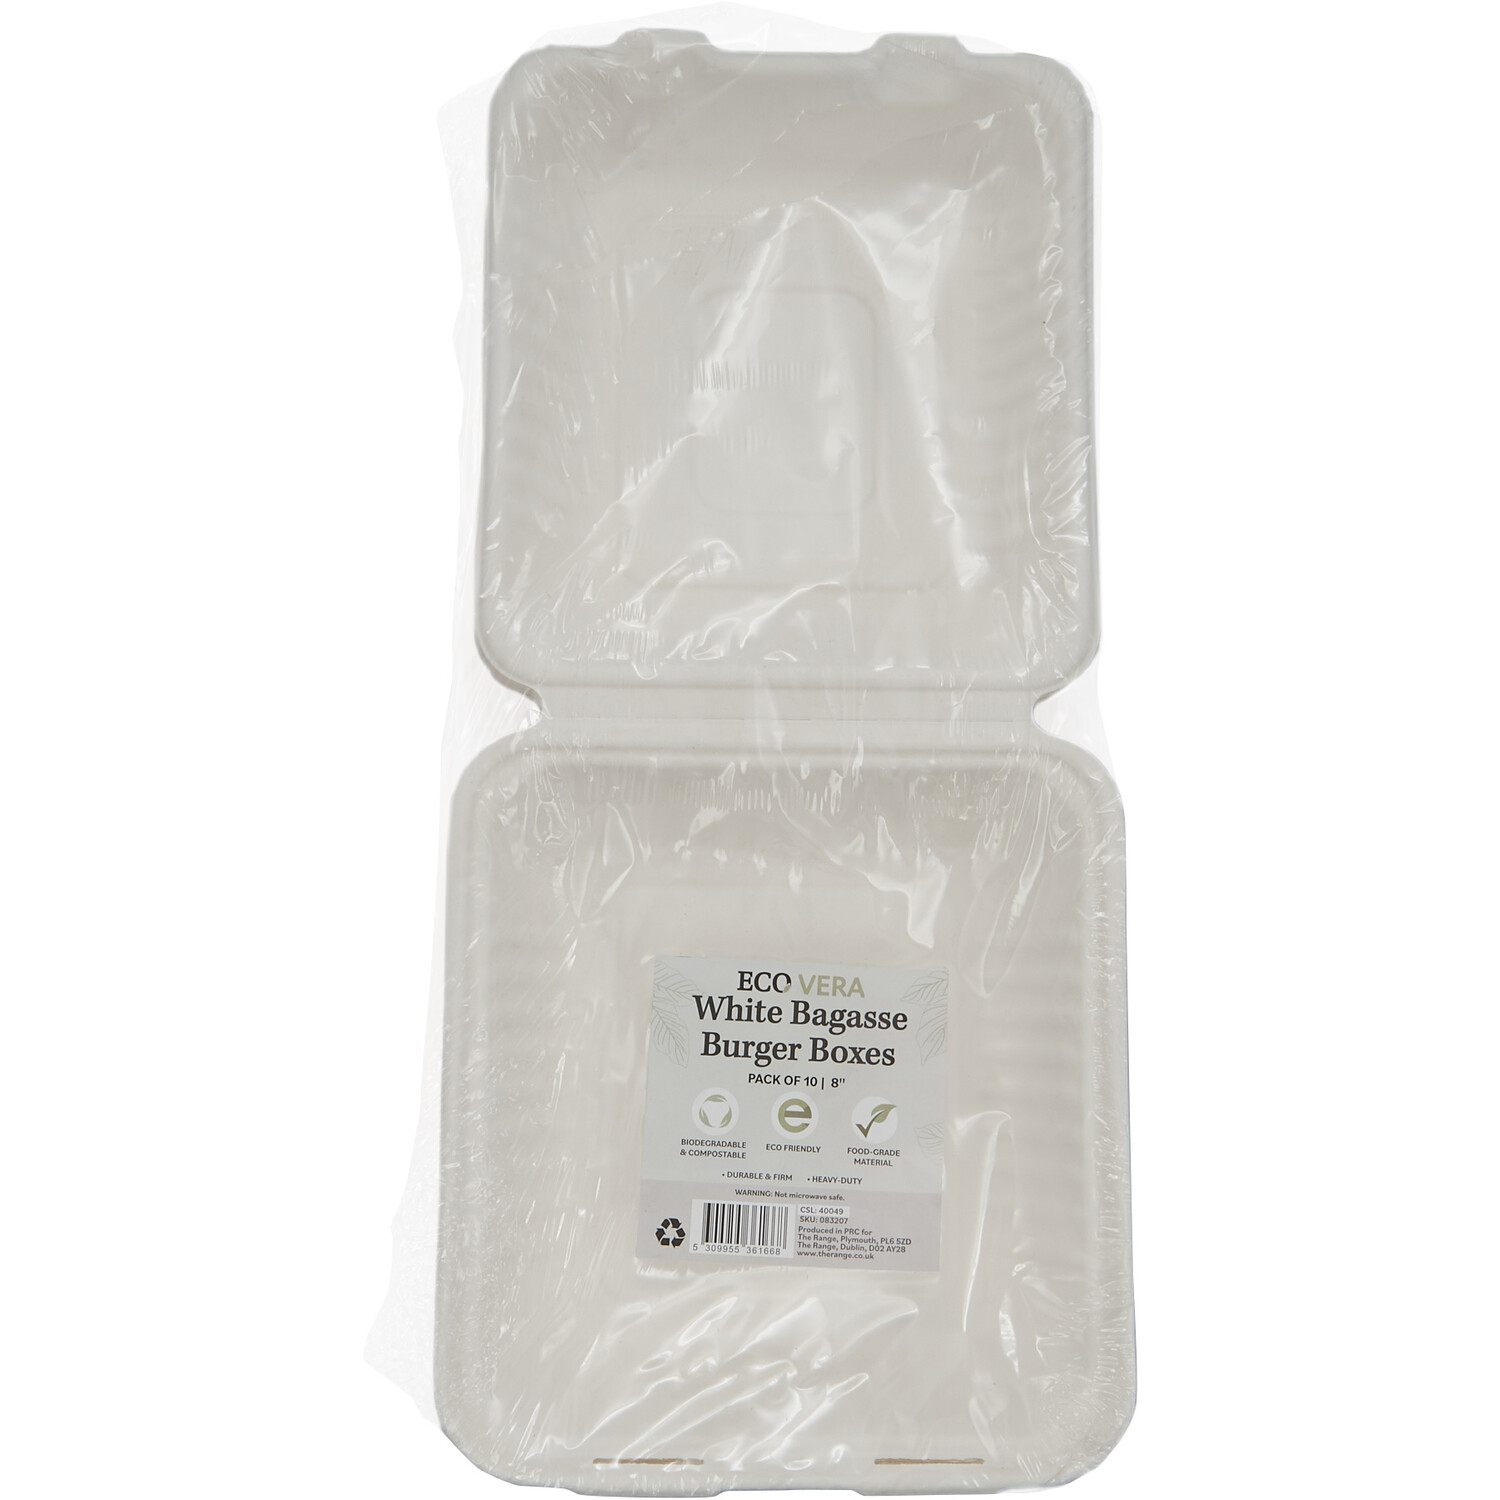 Pack of 10 Bagasse Burger Boxes - White Image 1